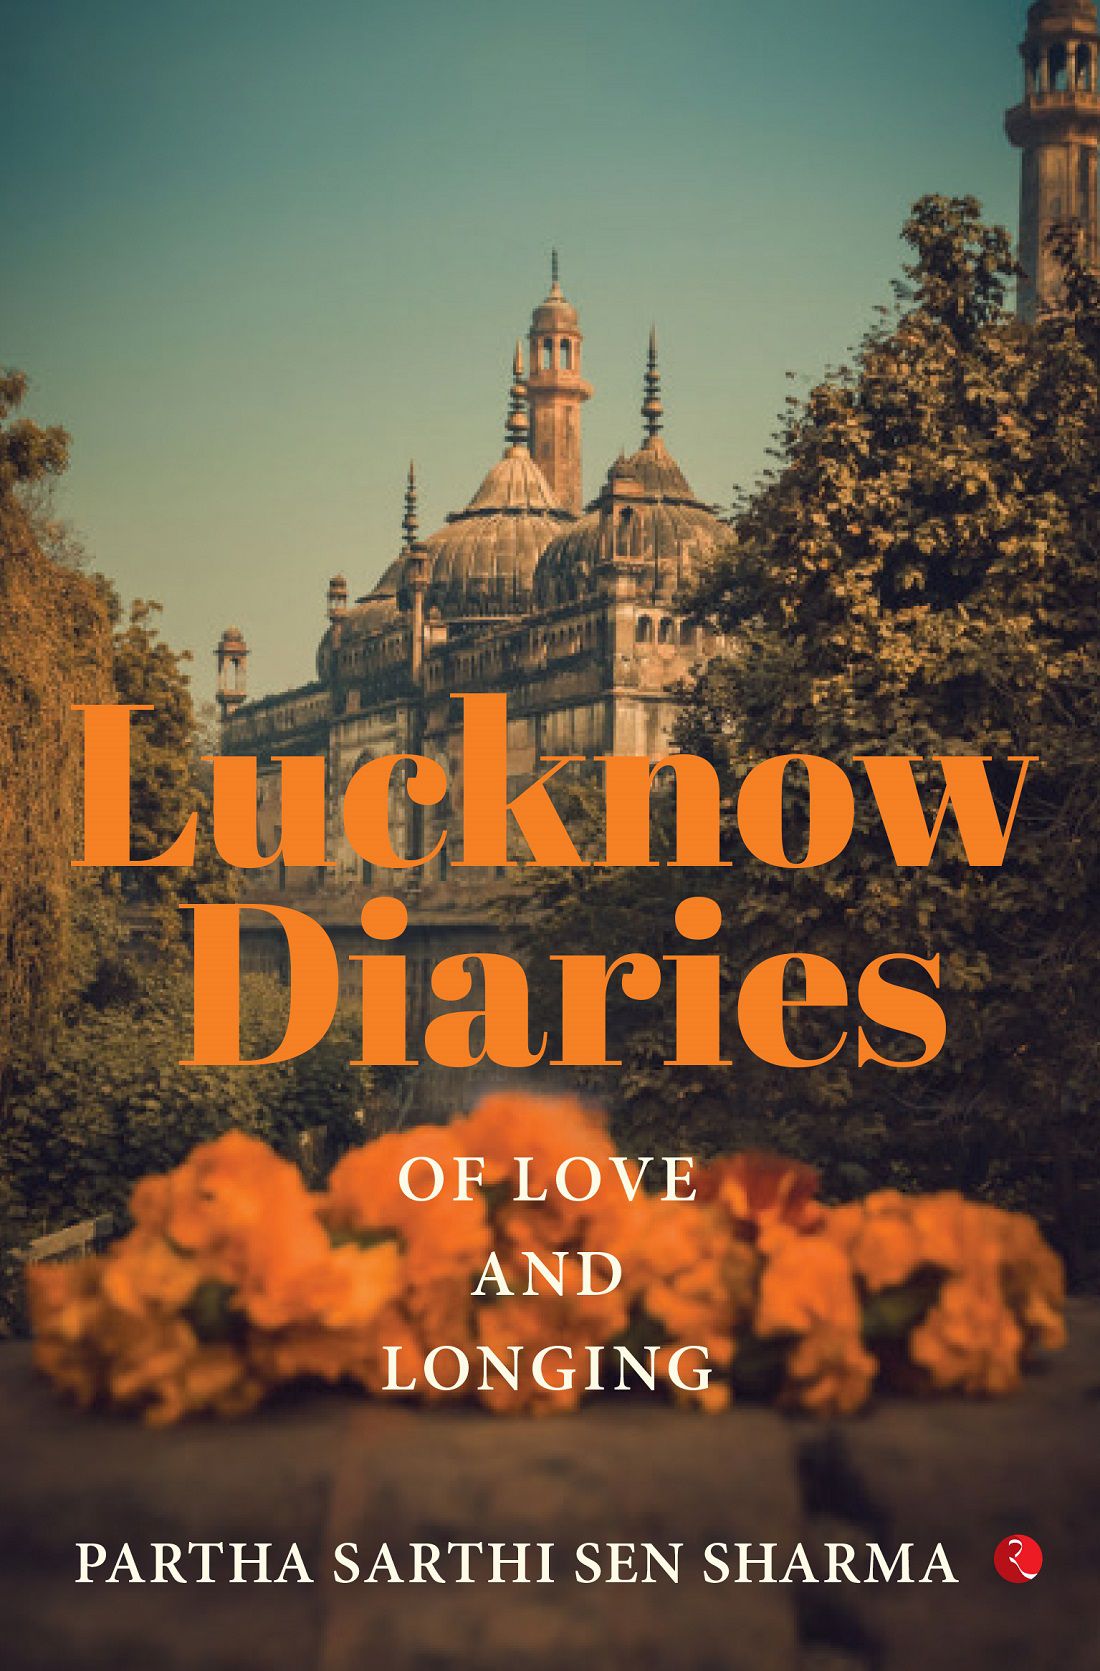     			LUCKNOW DIARIES - Of Love and Longing